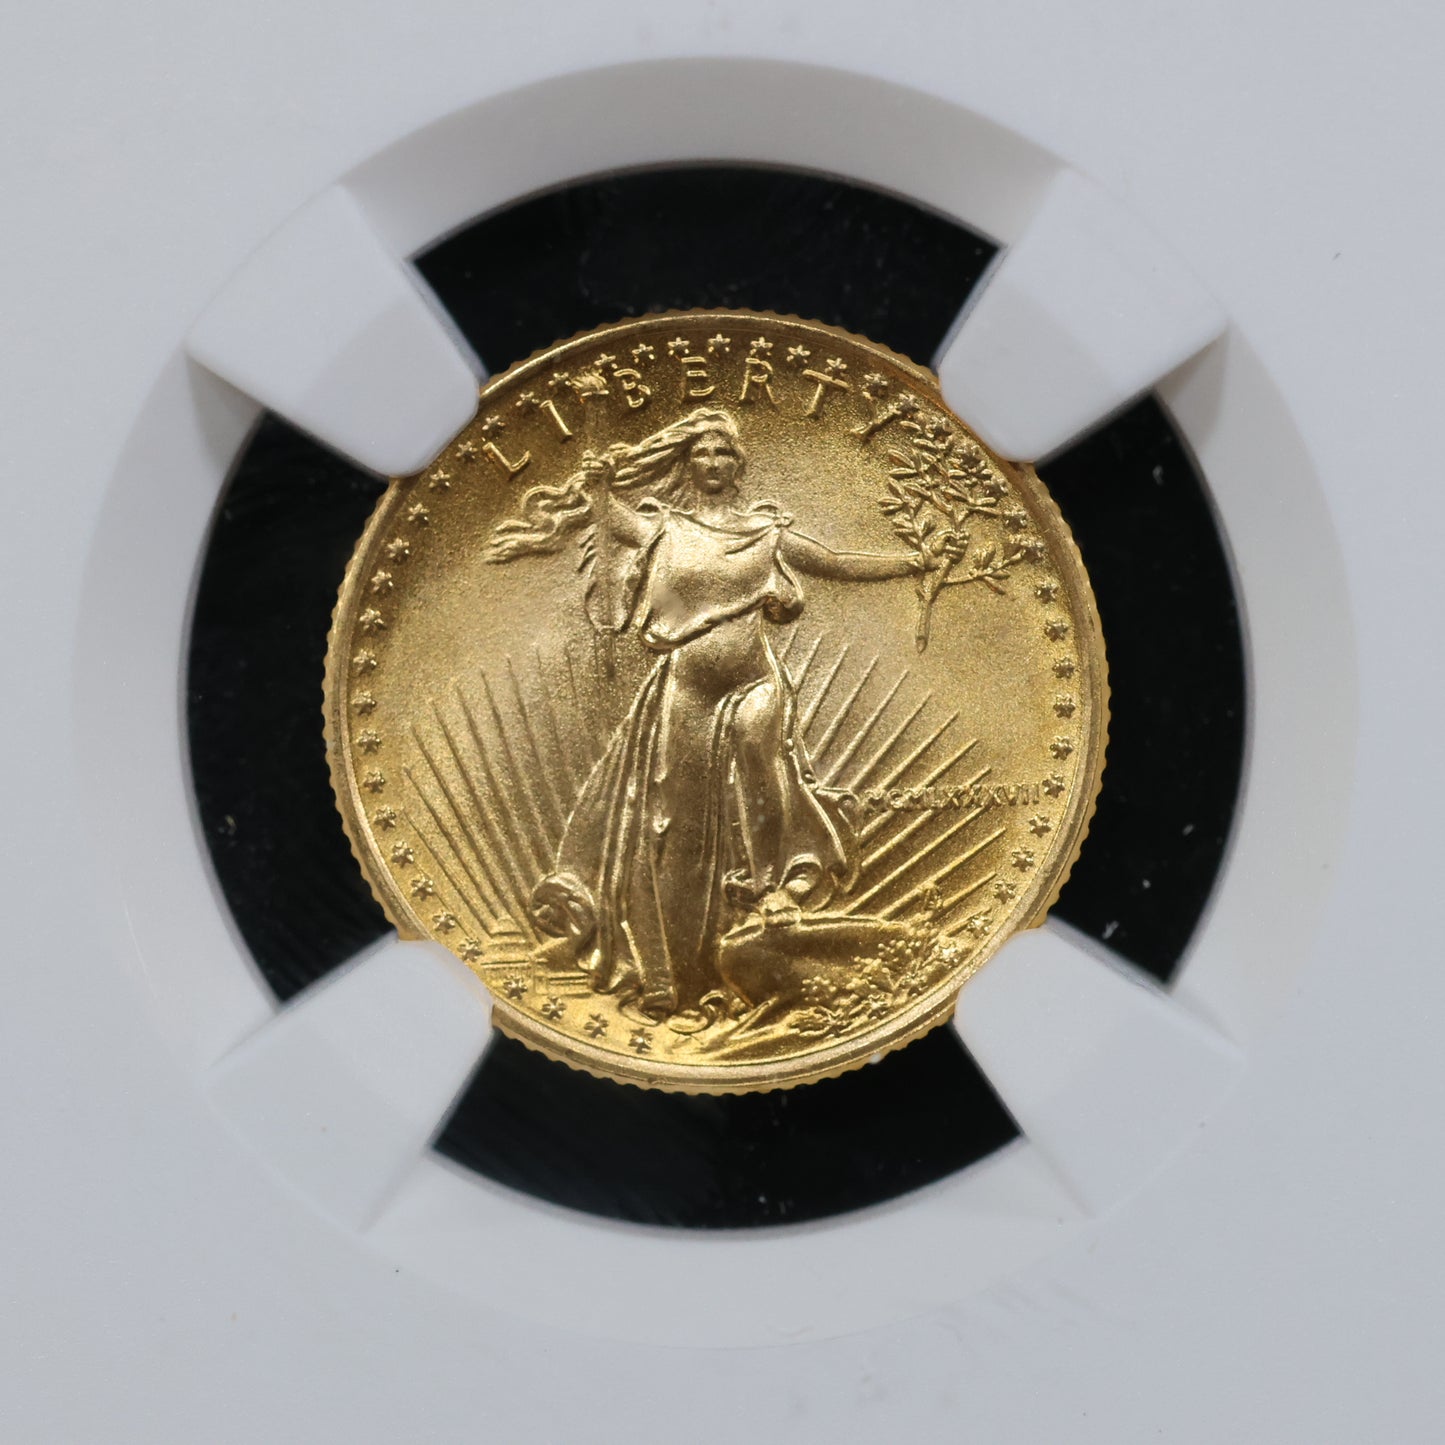 1987 1/10 oz Gold American Eagle 5$ Bullion Gold Coin - NGC MS 69